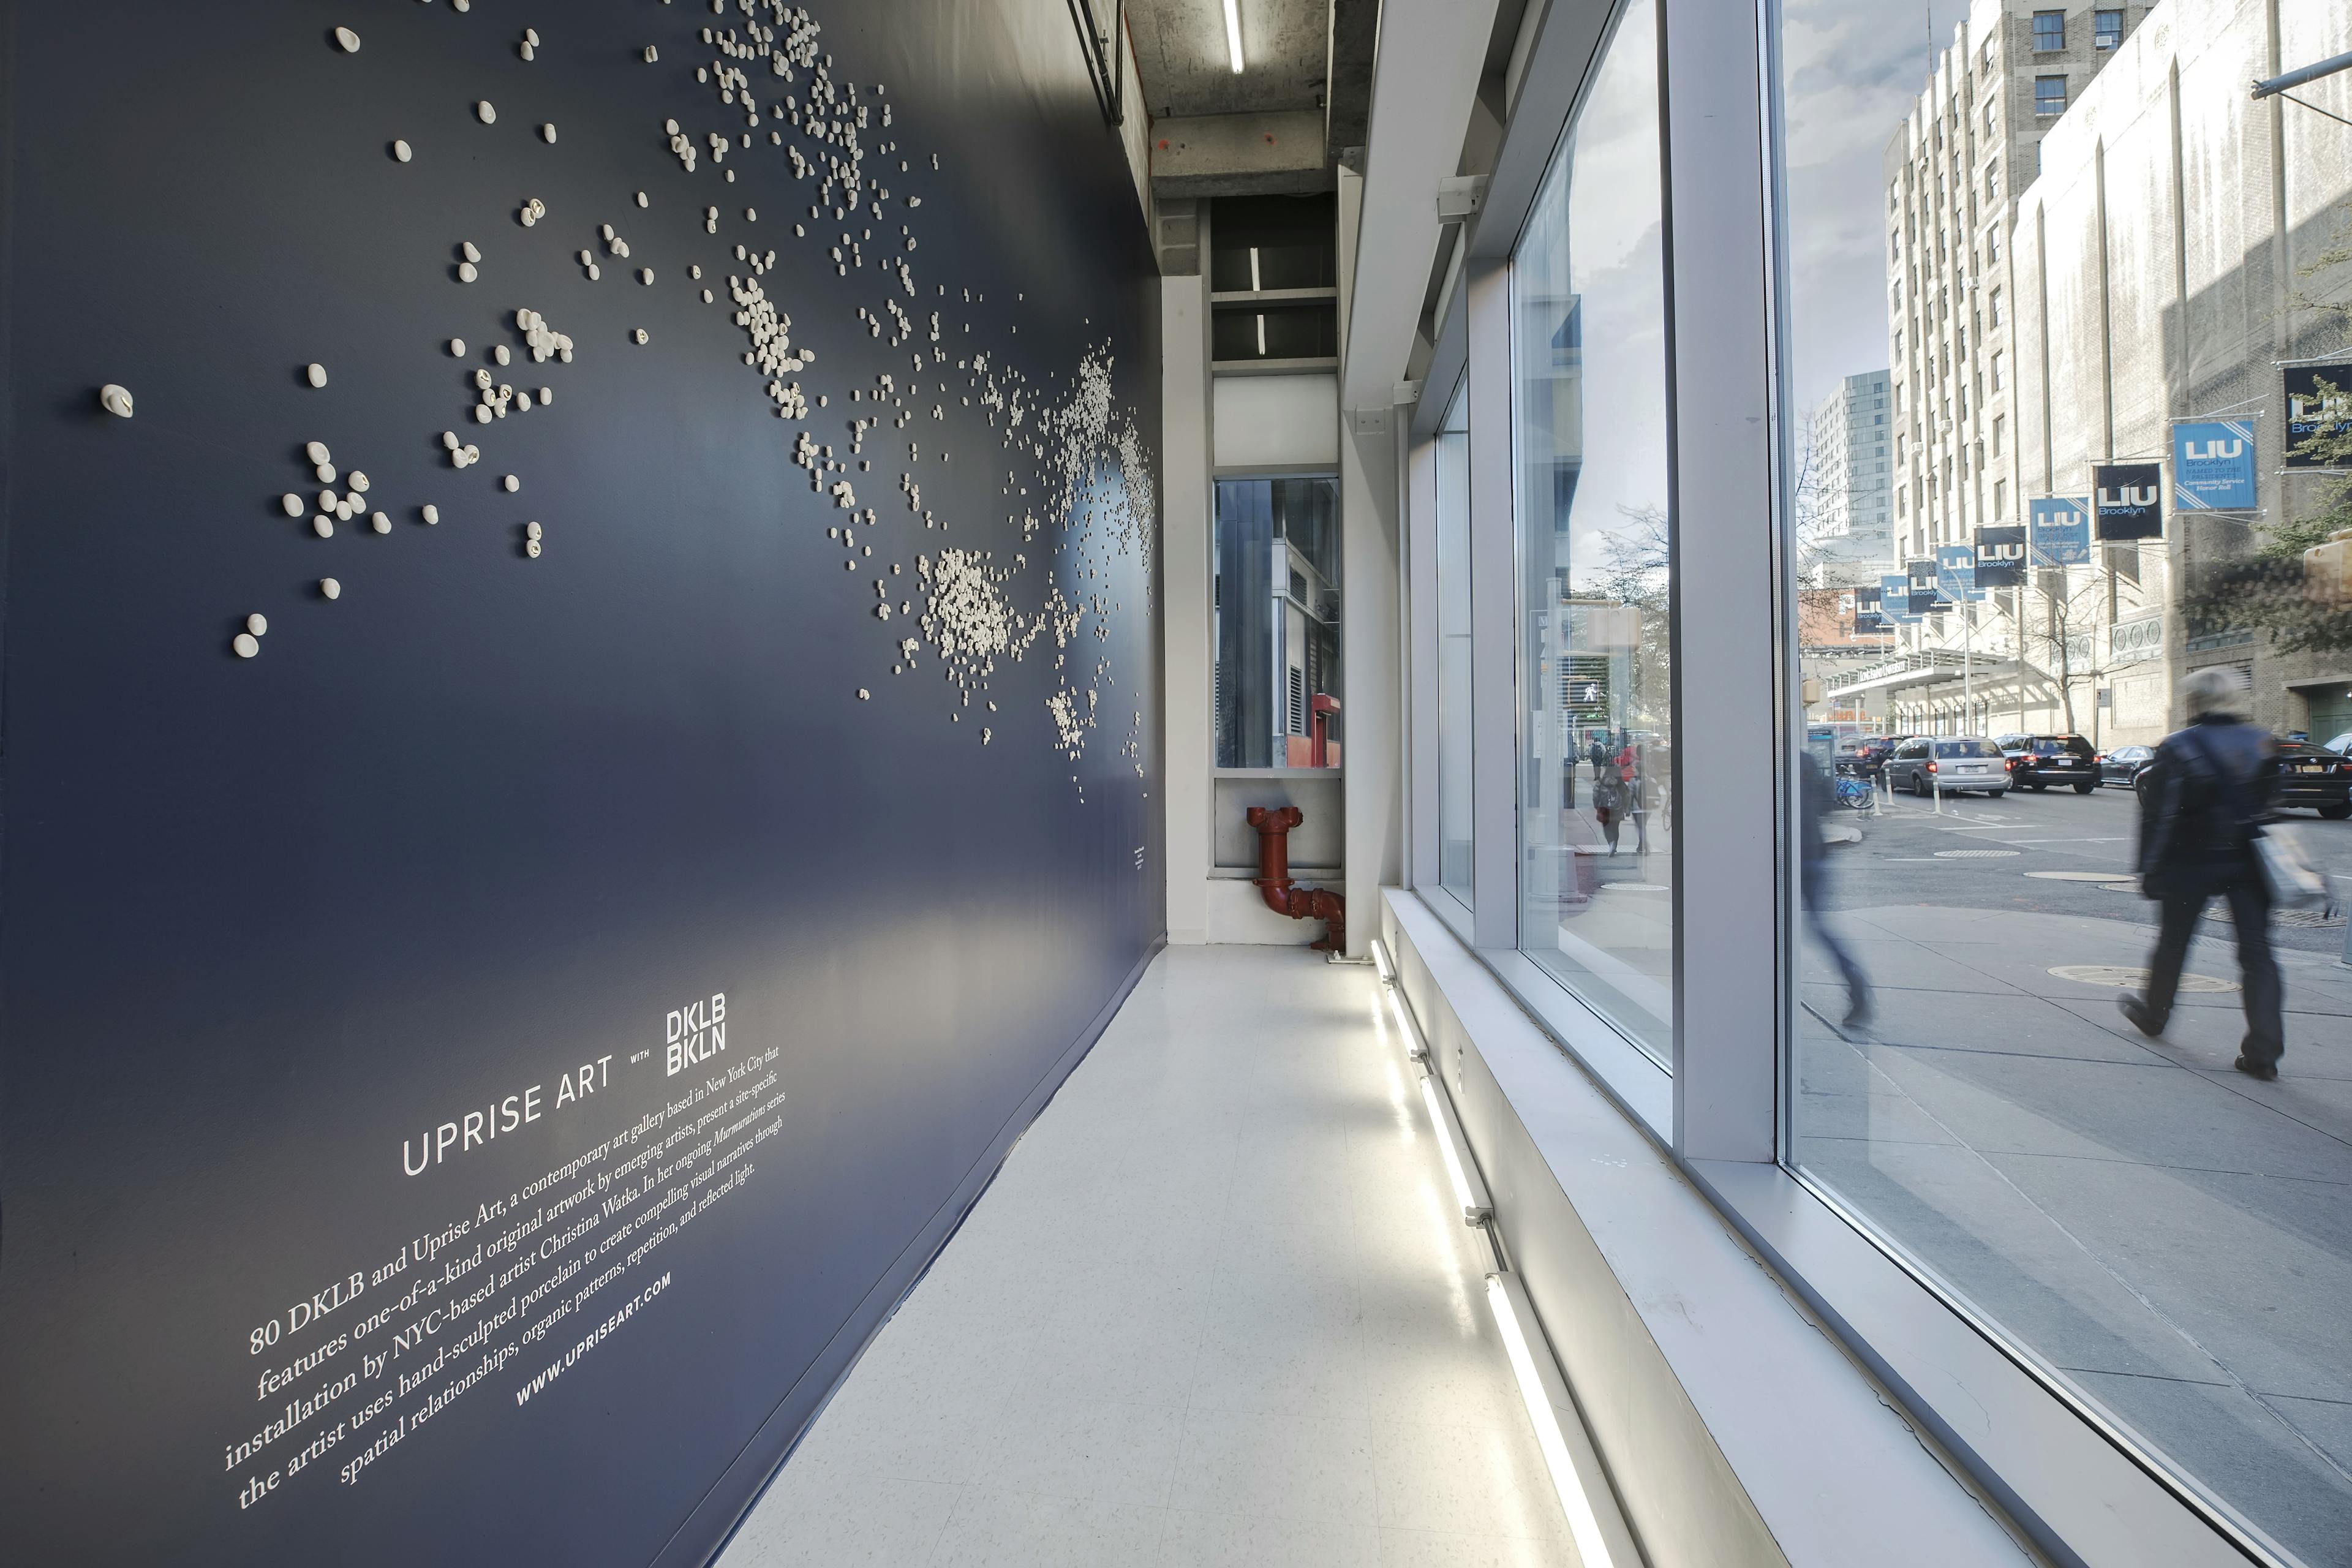 Custom porcelain installation by artist Christina Watka on a dark blue wall facing floor-to-ceiling windows that overlook onto a busy New York street.